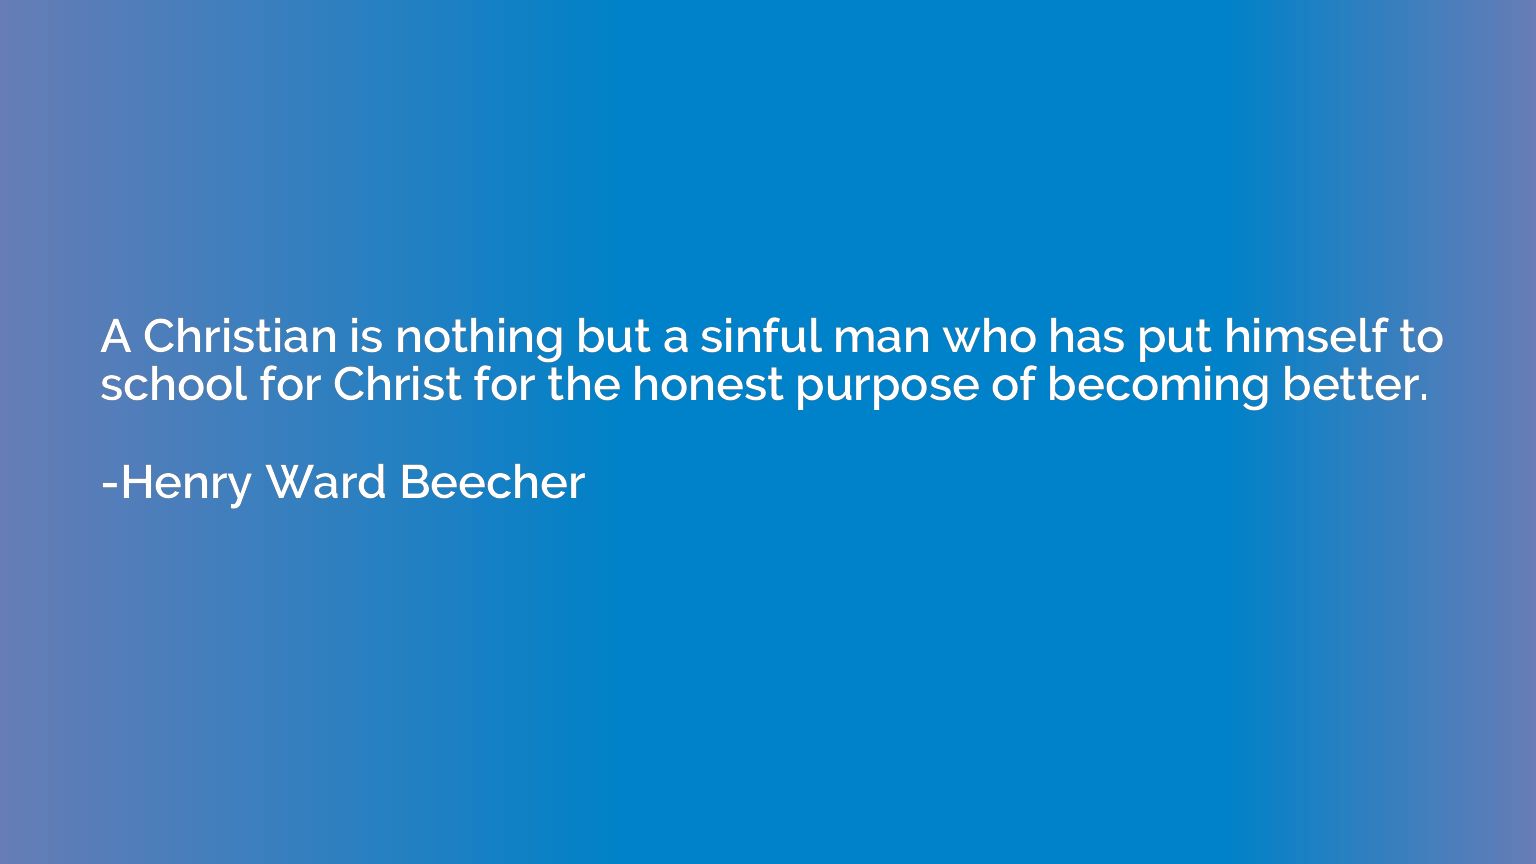 A Christian is nothing but a sinful man who has put himself 